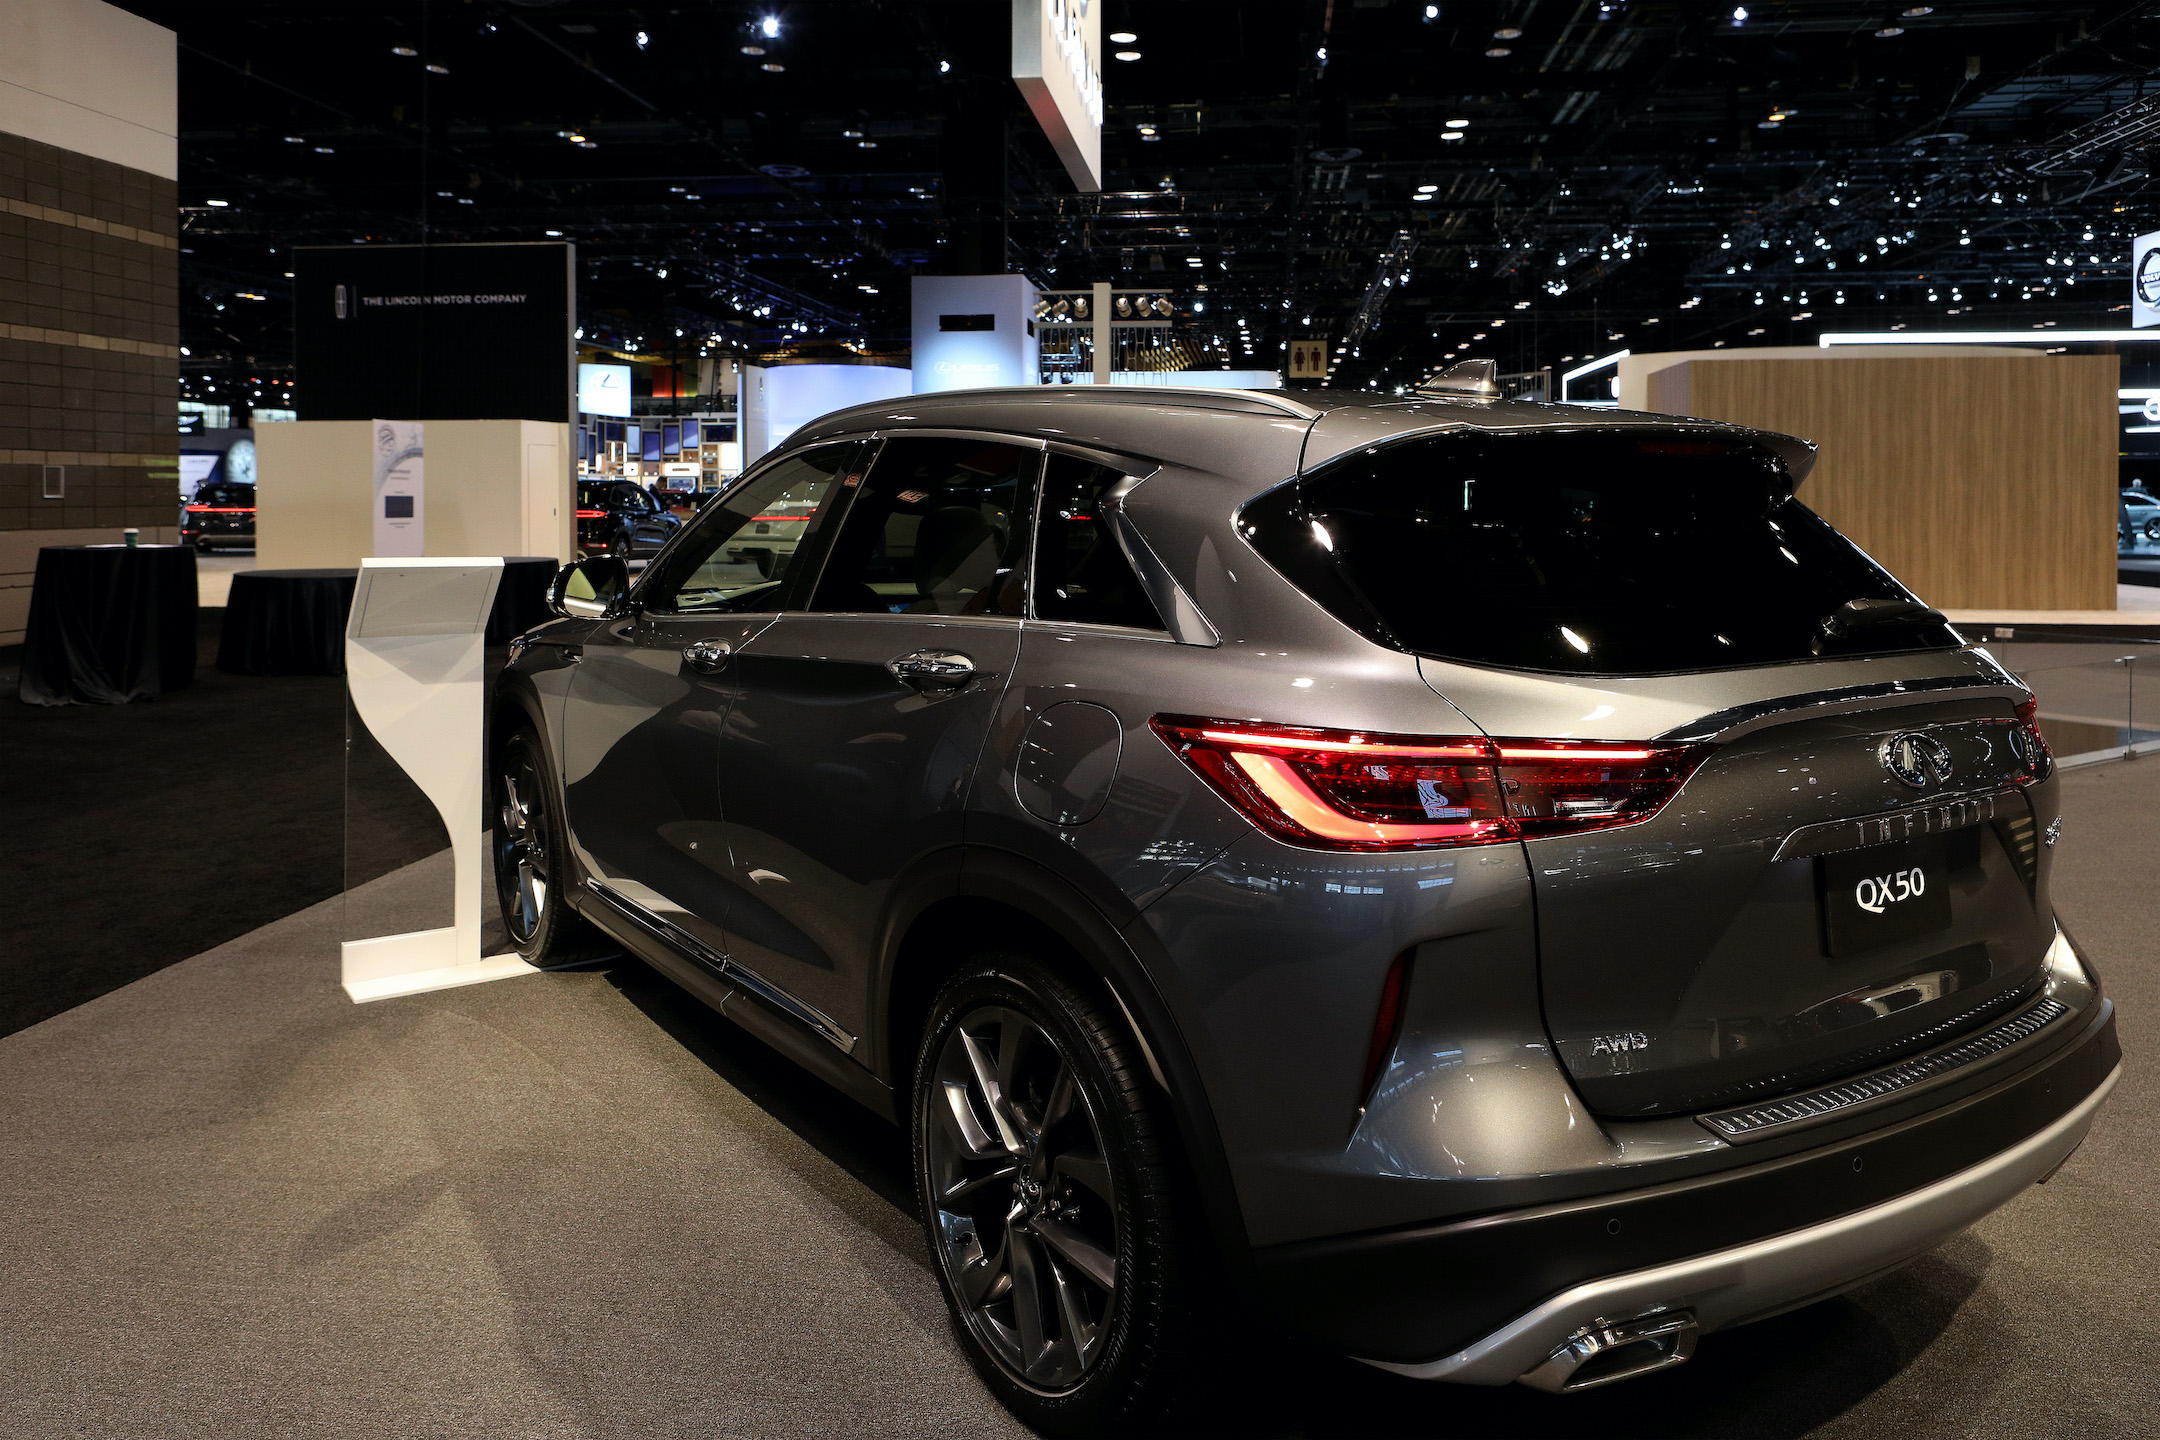 2019 Infiniti QX50 is on display at the 111th Annual Chicago Auto Show at McCormick Place